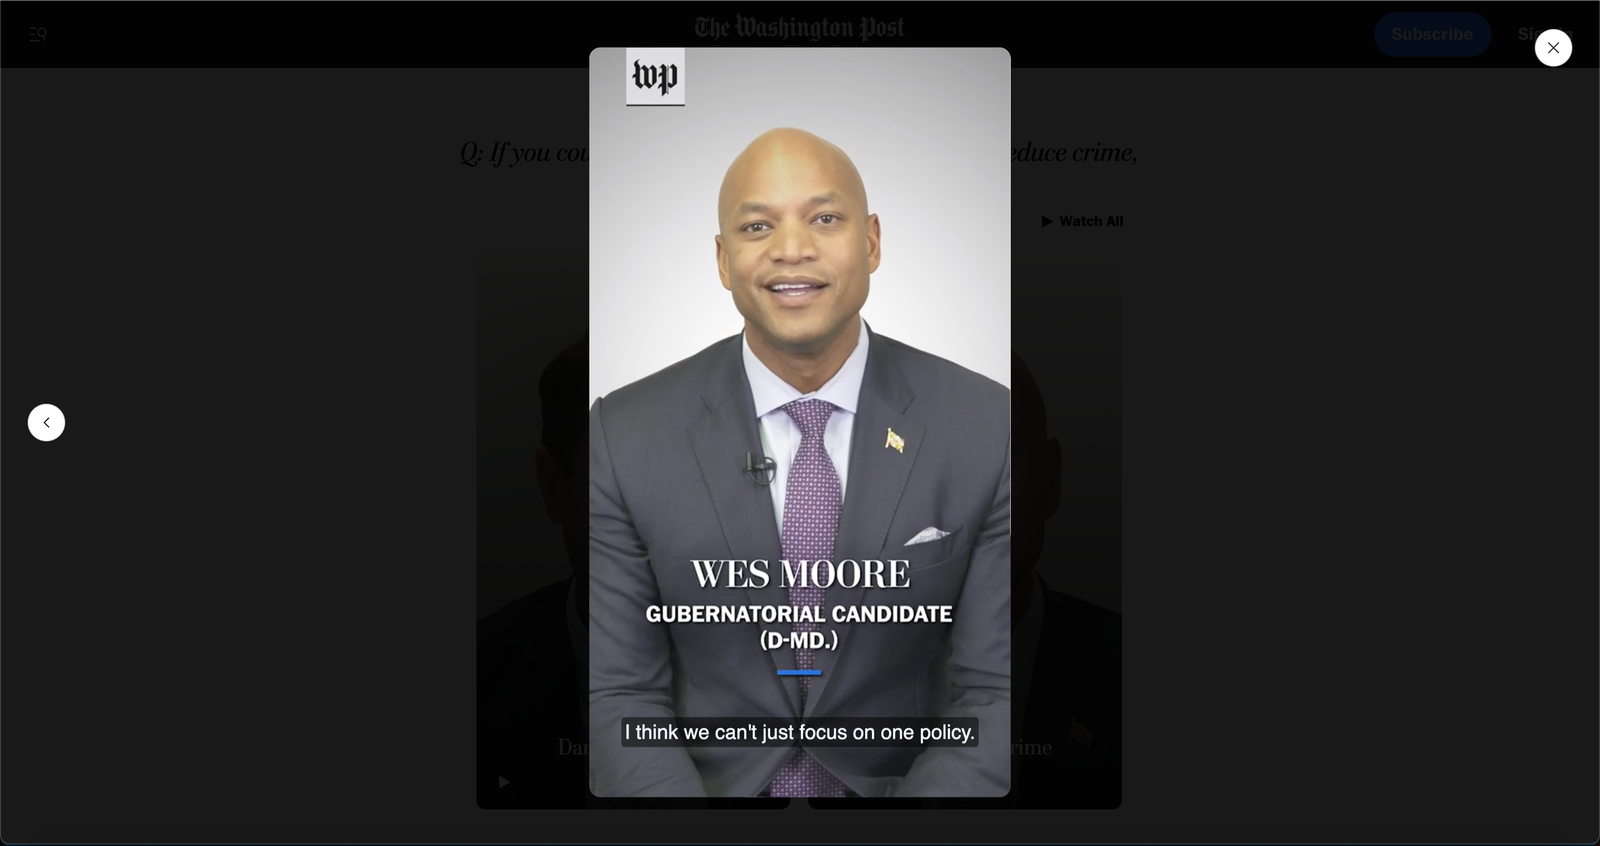 ​​Screenshot shows a vertical video embed on the Washington Post website. Since the video was clicked open by the user, the captions are now visible.